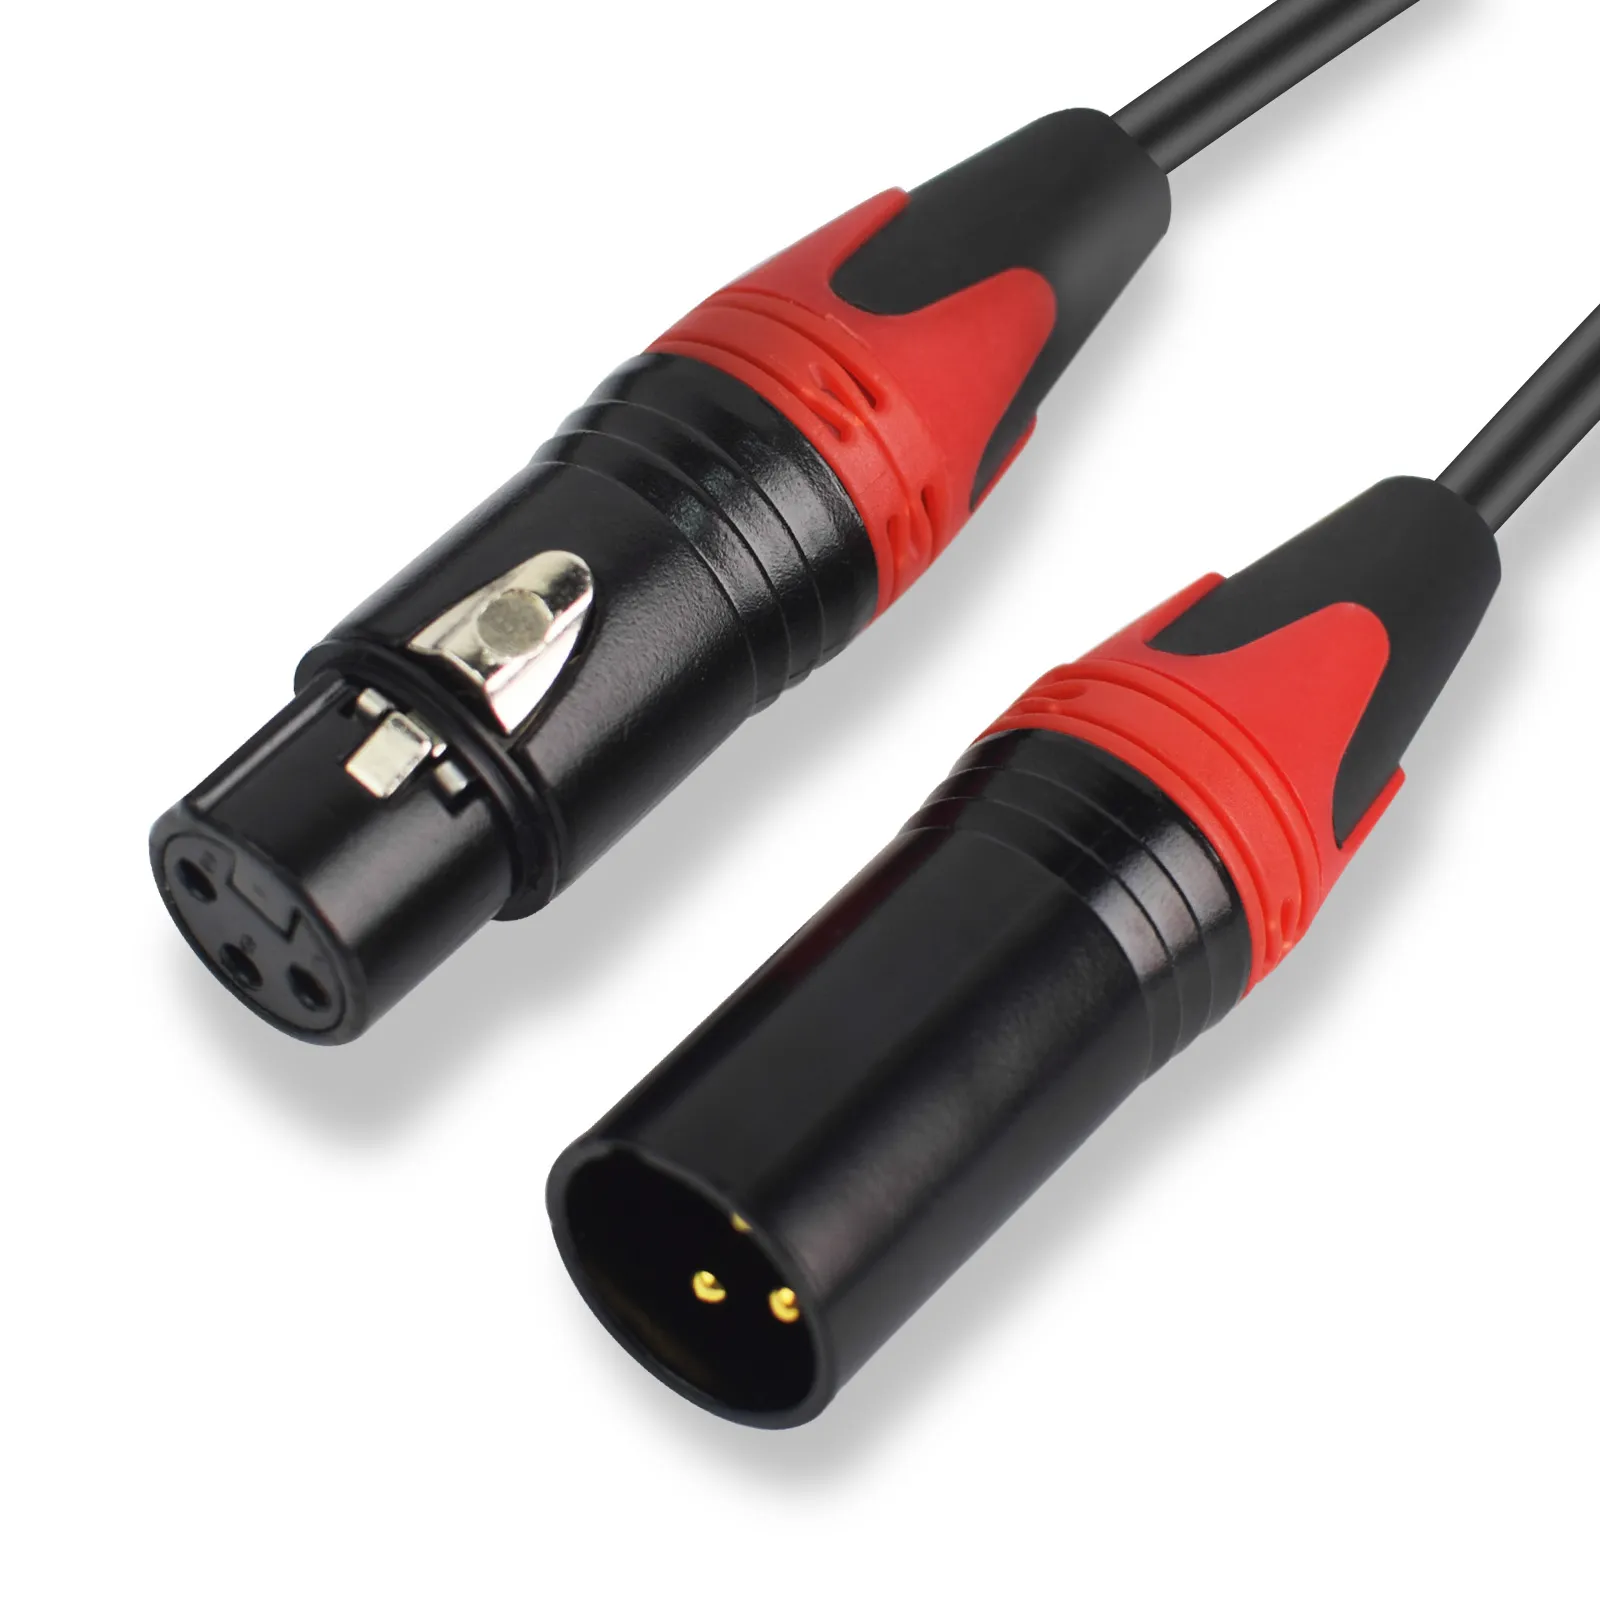 Squarock Standard XLR to XLR Cable, Male to Female Microphone Cable, Durable PVC Jacket Noise-Cancelling 7.15 Feet, Black